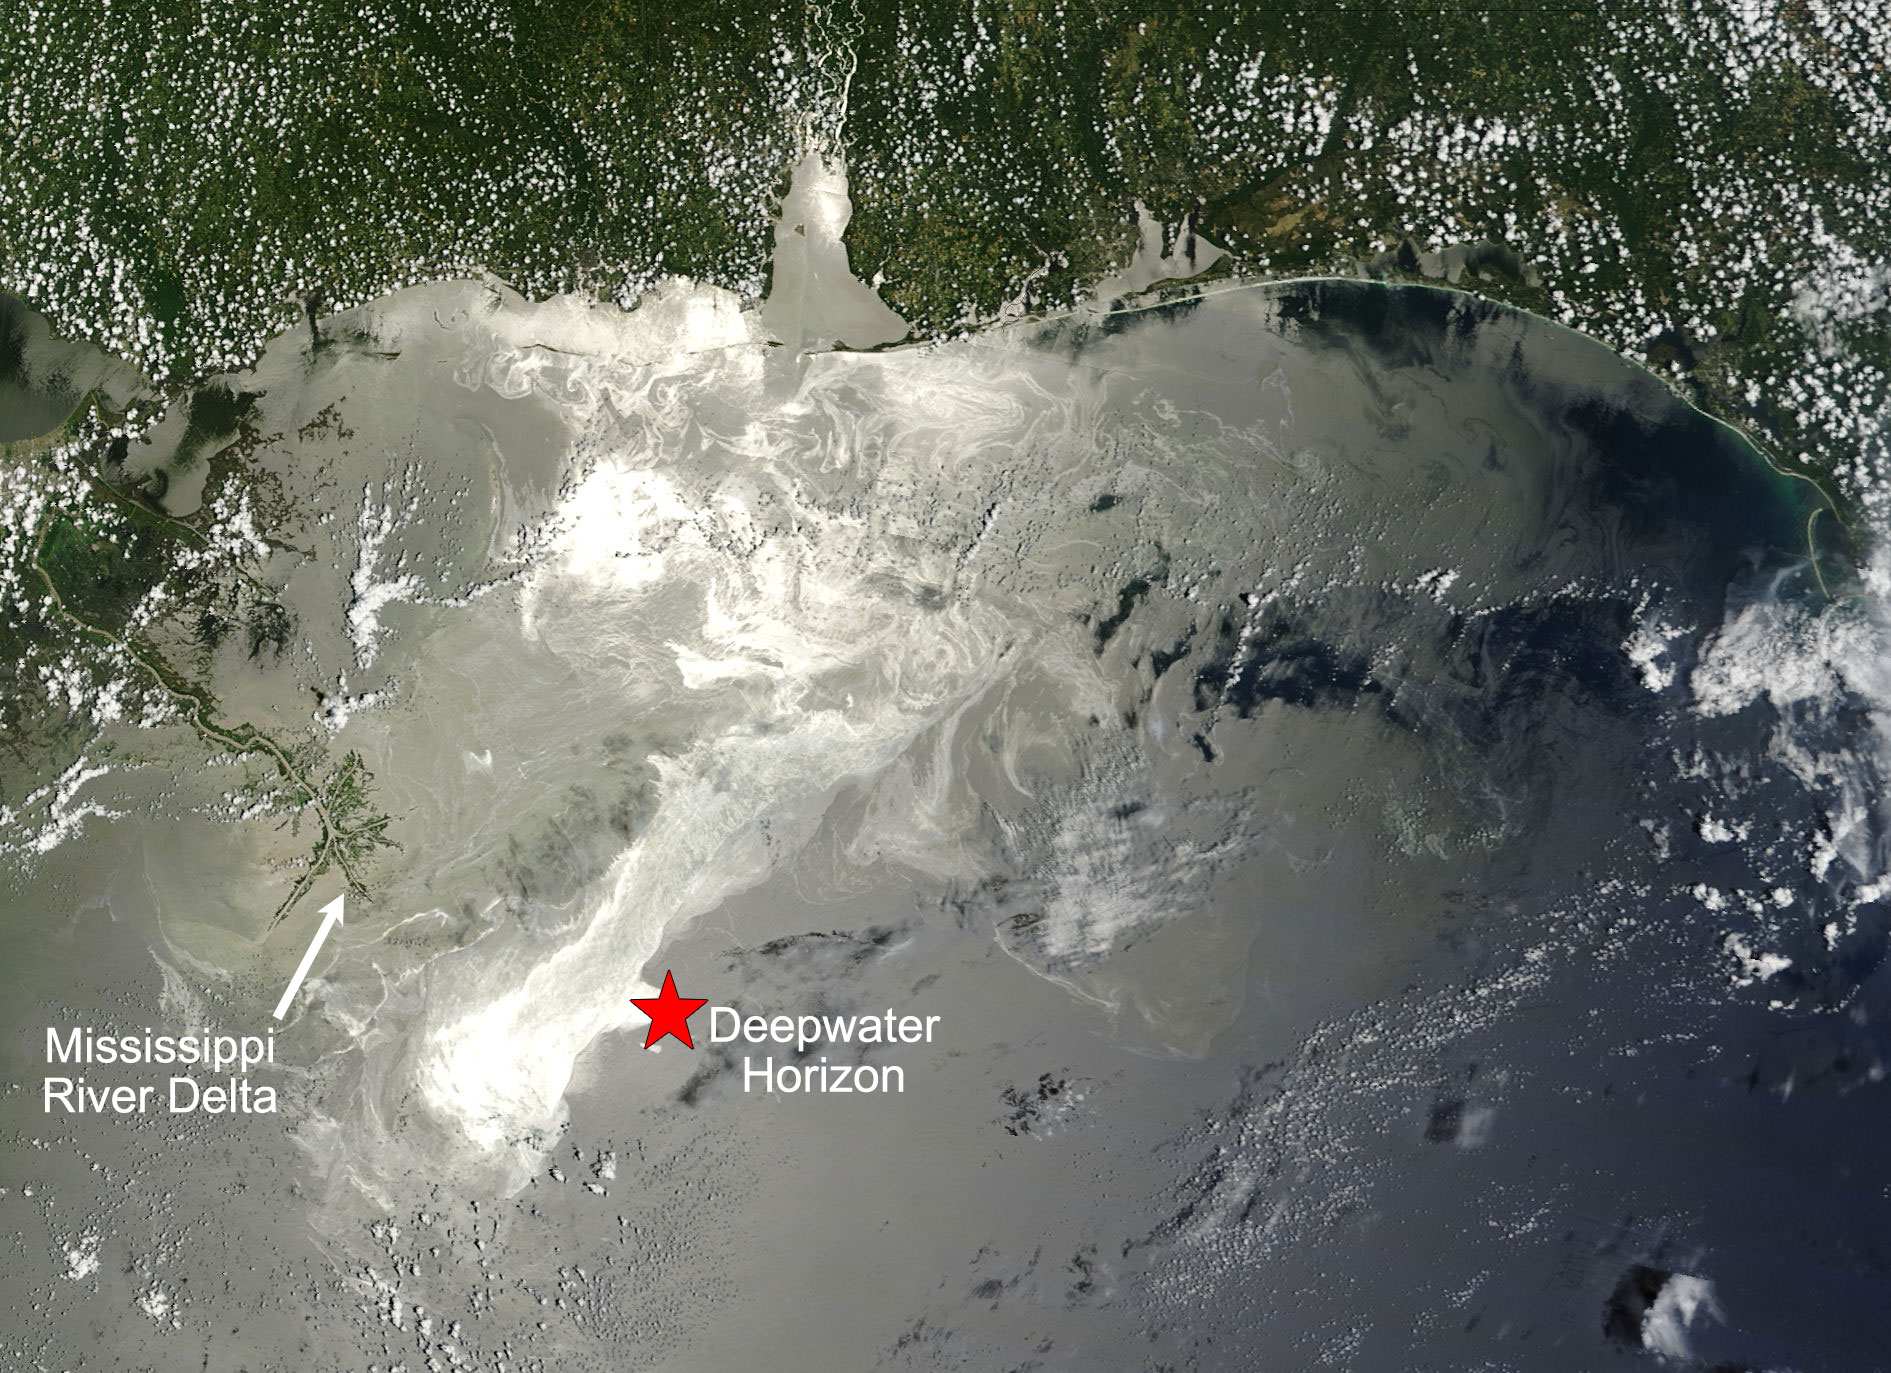 Satellite photograph of the Gulf of Mexico in 2010 showing an oil slick produced by the Deepwater Horizon disaster. The Mississippi River Delta is at the center-left of the image, with a star marking the approximate location of the Deepwater Horizon to the southeast.